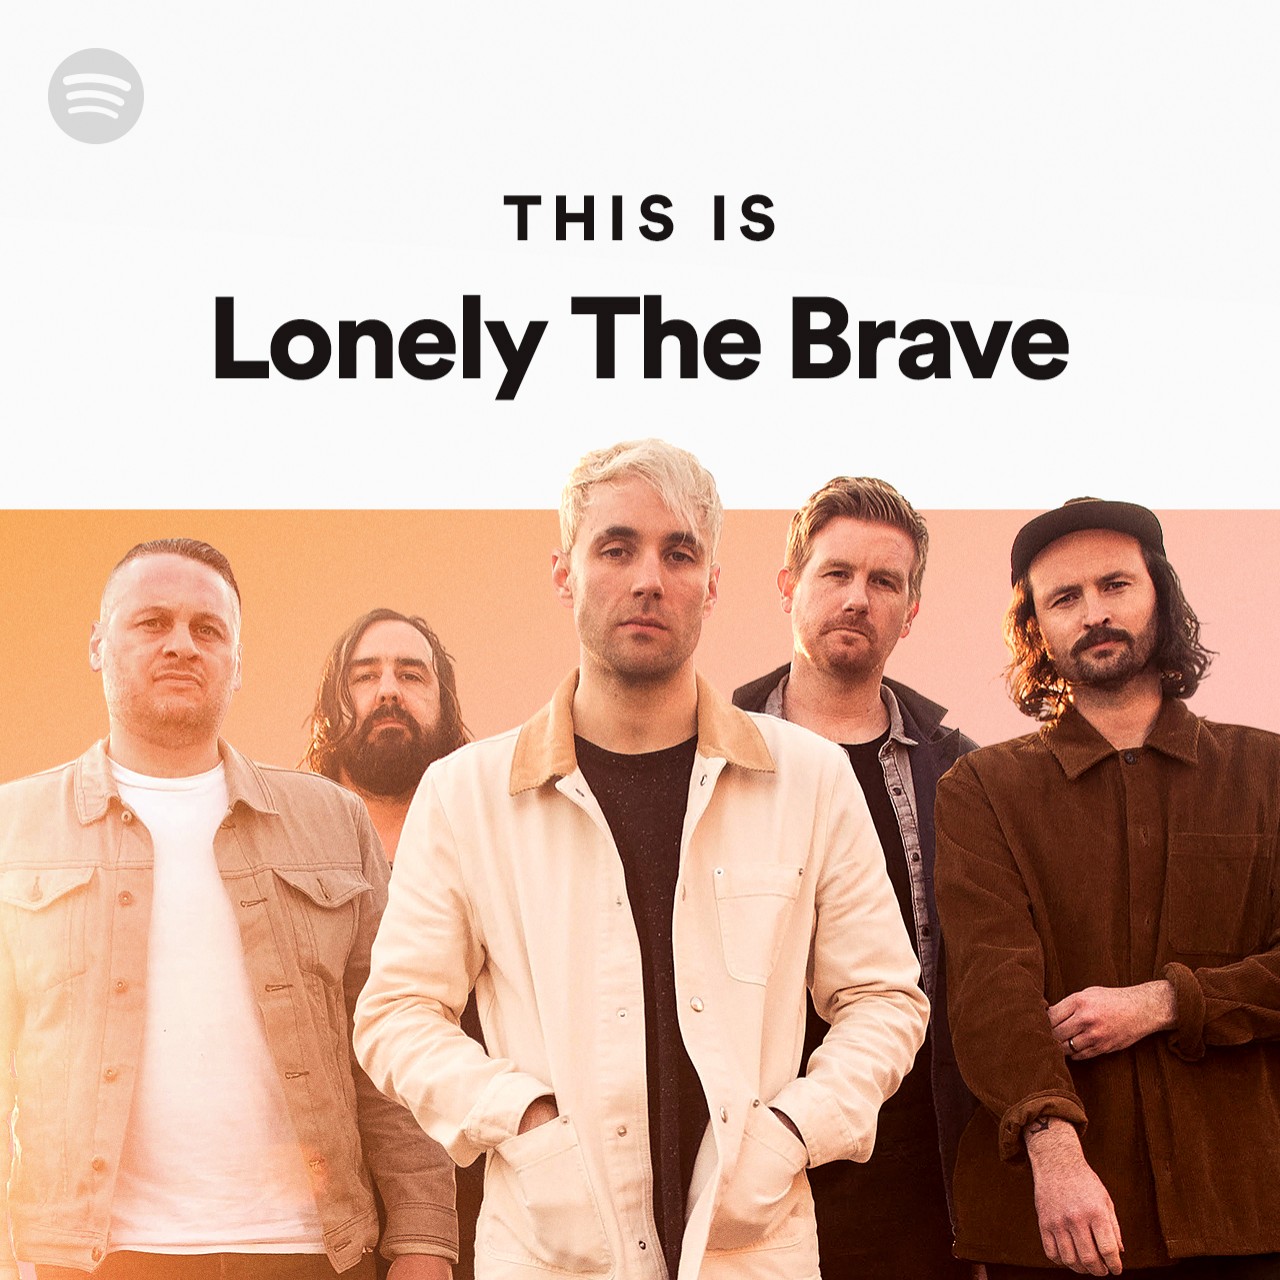 This Is Lonely The Brave